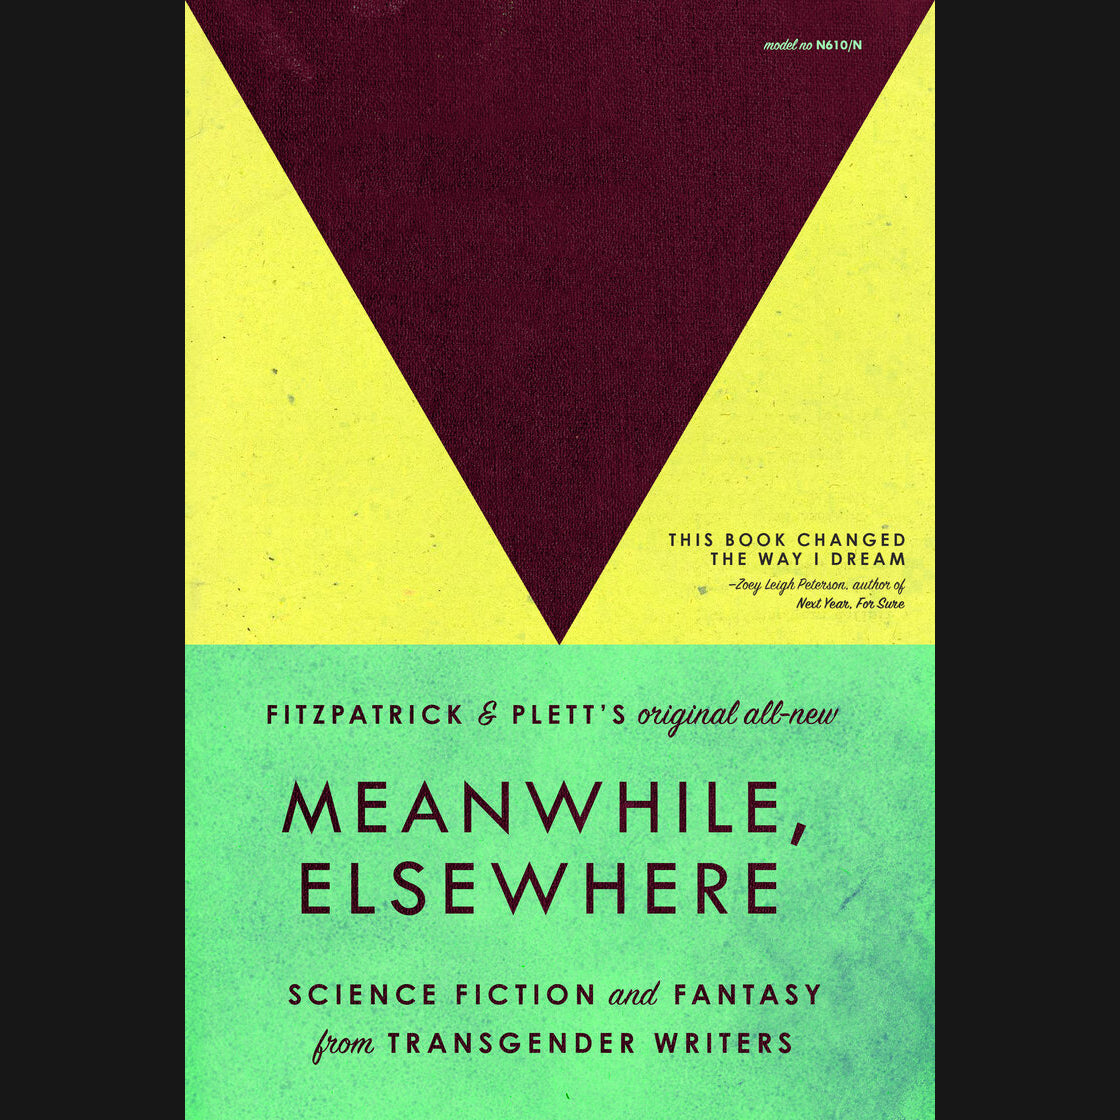 CAT FITZPATRICK & CASEY PLETT (ED.) - "MEANWHILE, ELSEWHERE: SCIENCE FICTION & FANTASY FROM TRANSGENDER WRITERS" BOOK